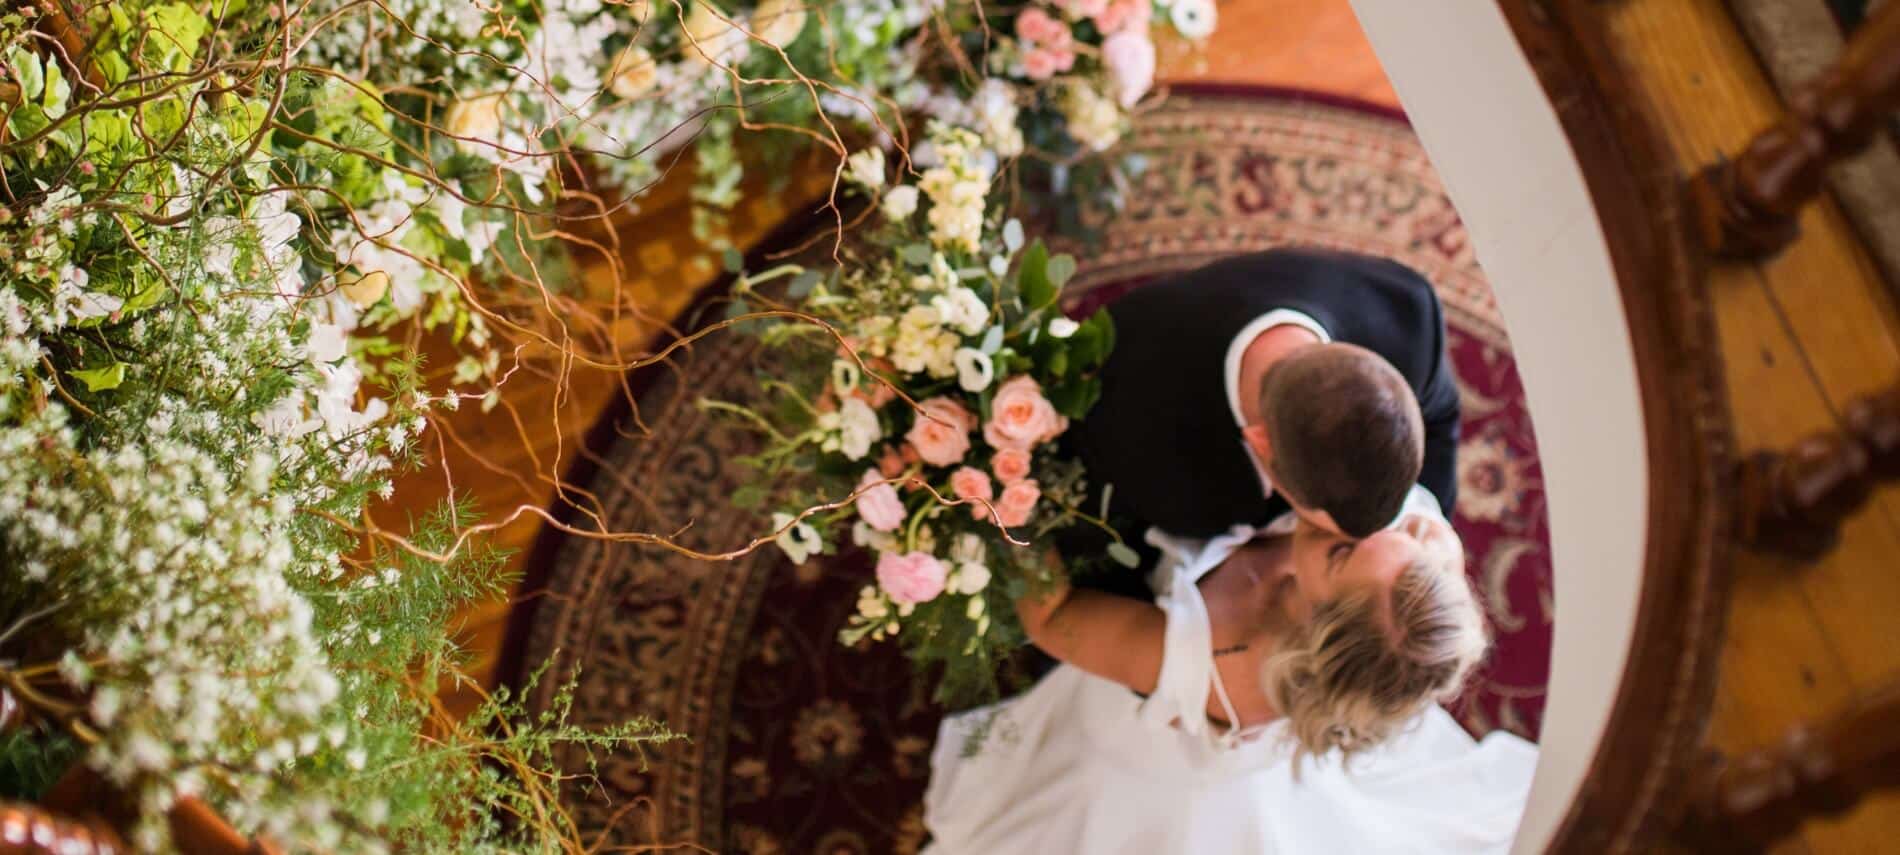 Looking down on a bride and groom embracing at the bottom of a beautiful wooden spiral staircase